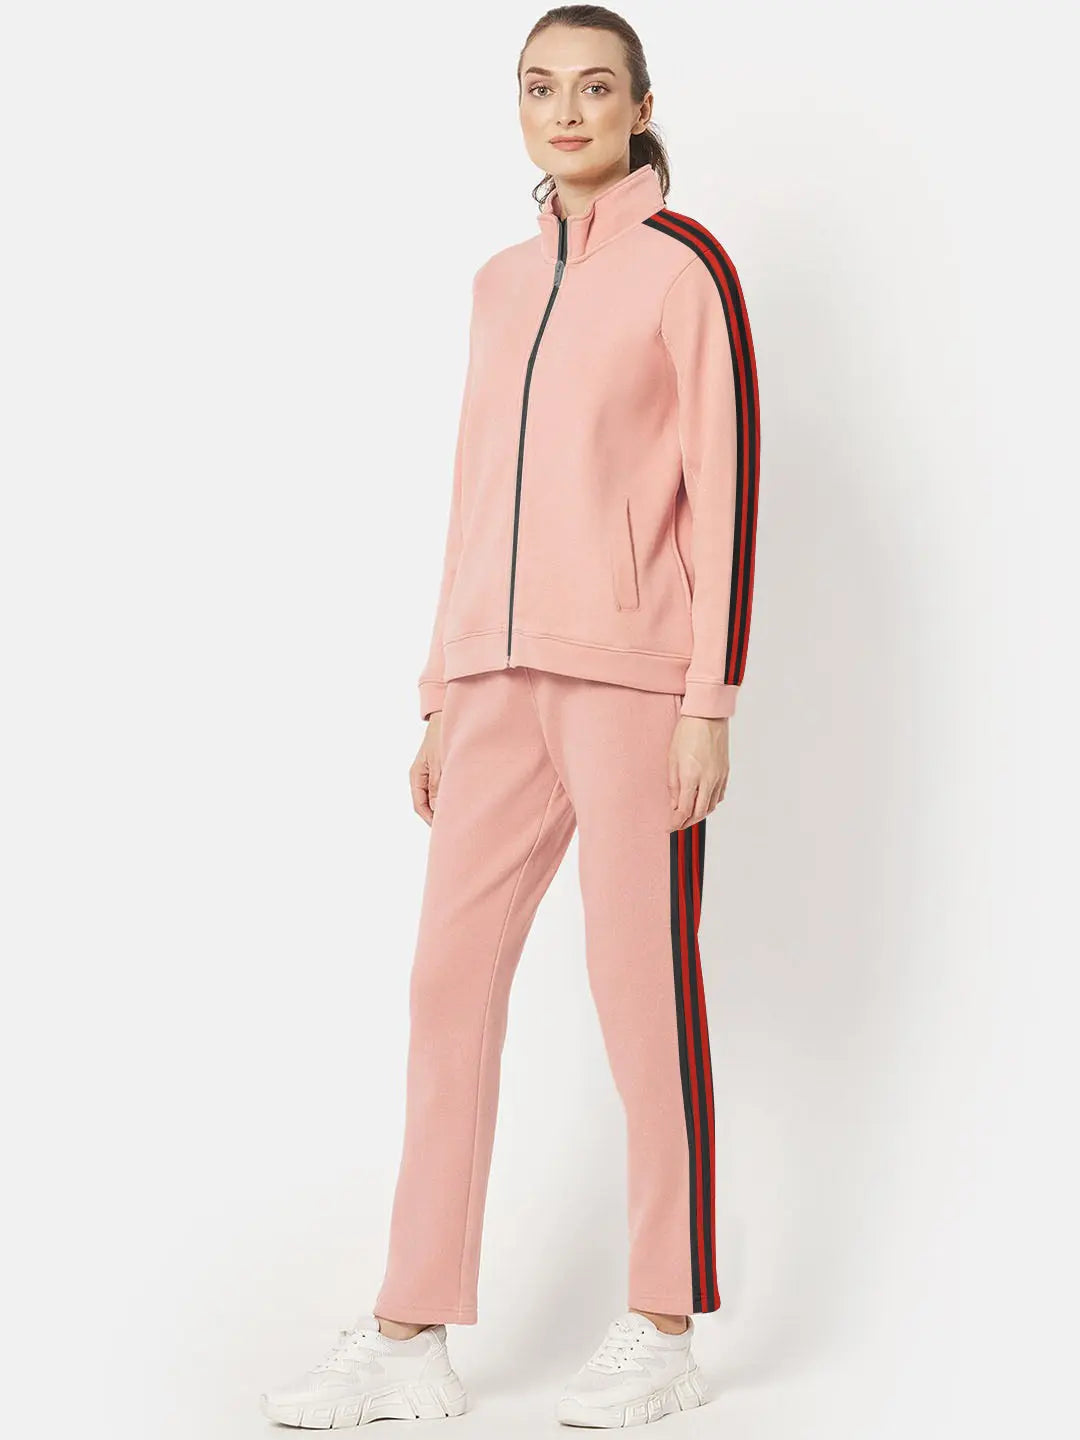 Louis Vicaci Fleece Zipper Tracksuit For Ladies-Light Pink with Black Stripe-BE17318 Louis Vicaci